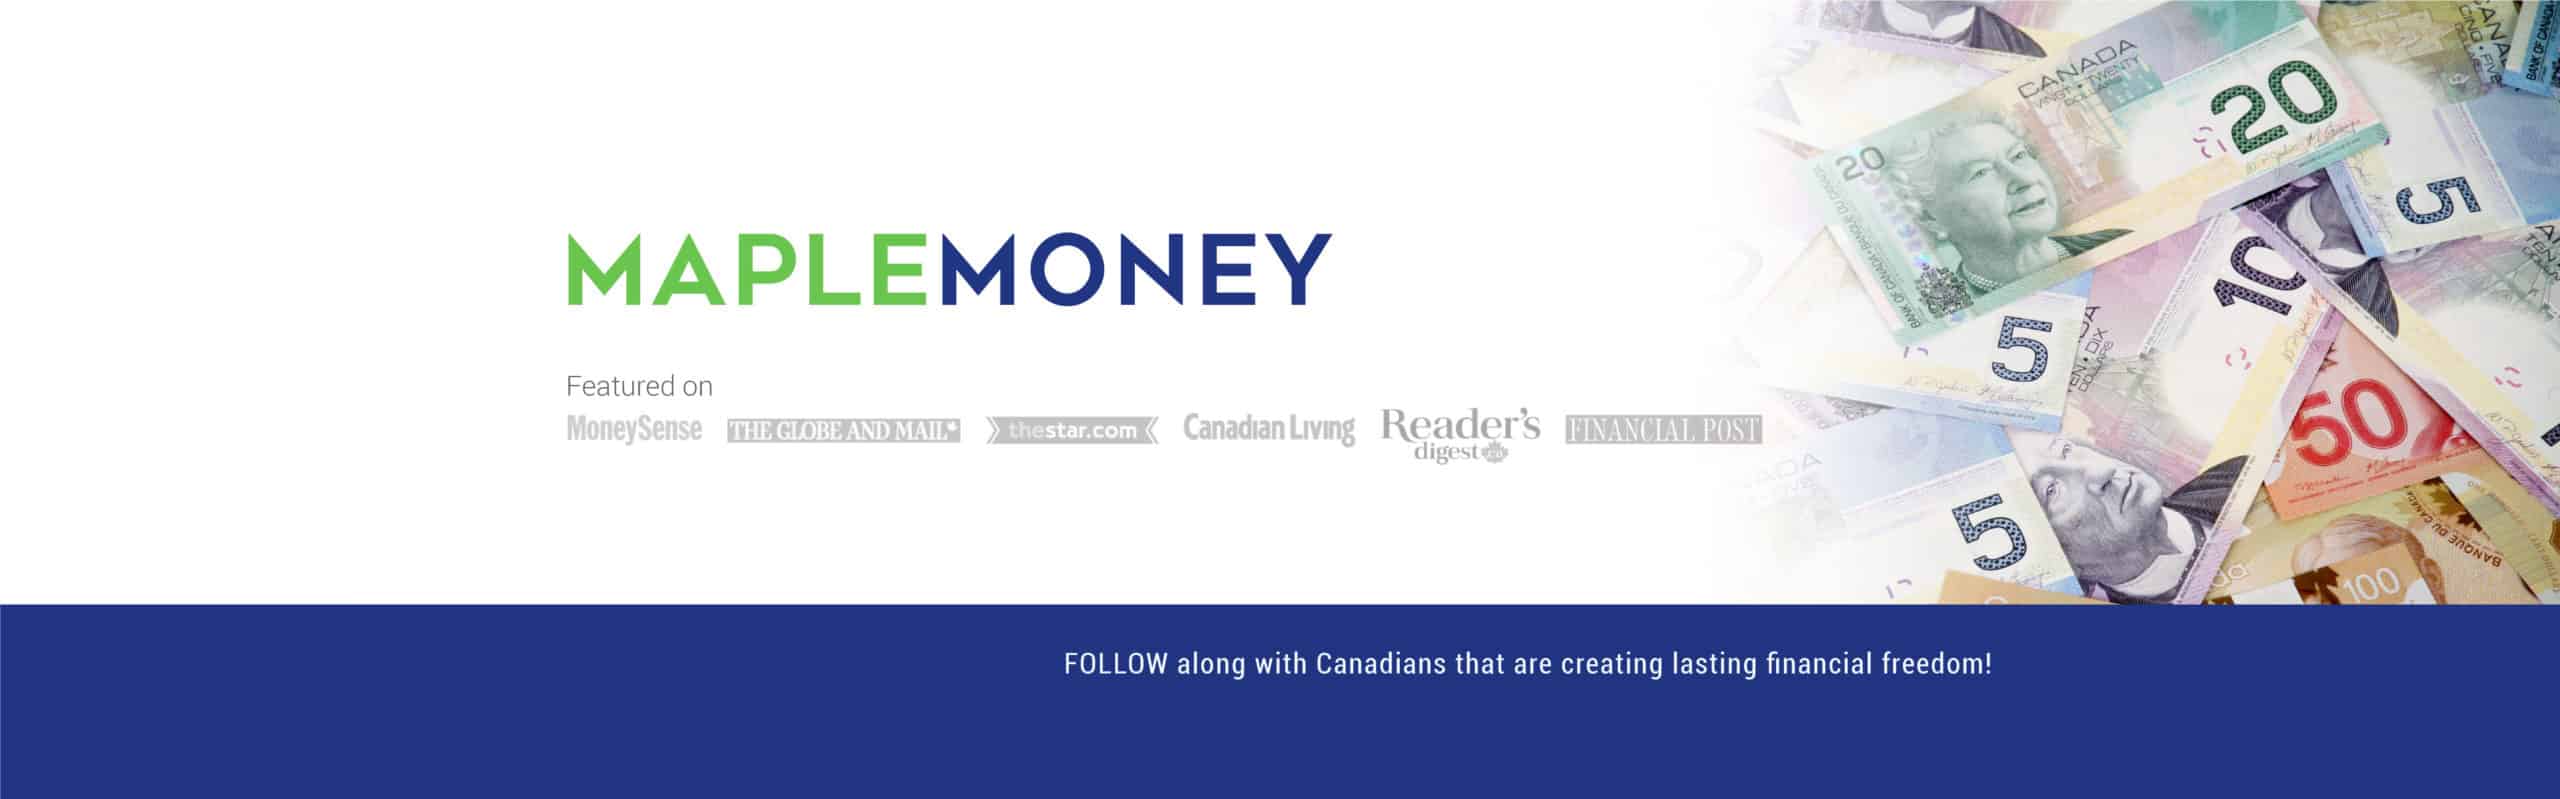 A financial website banner with the name 